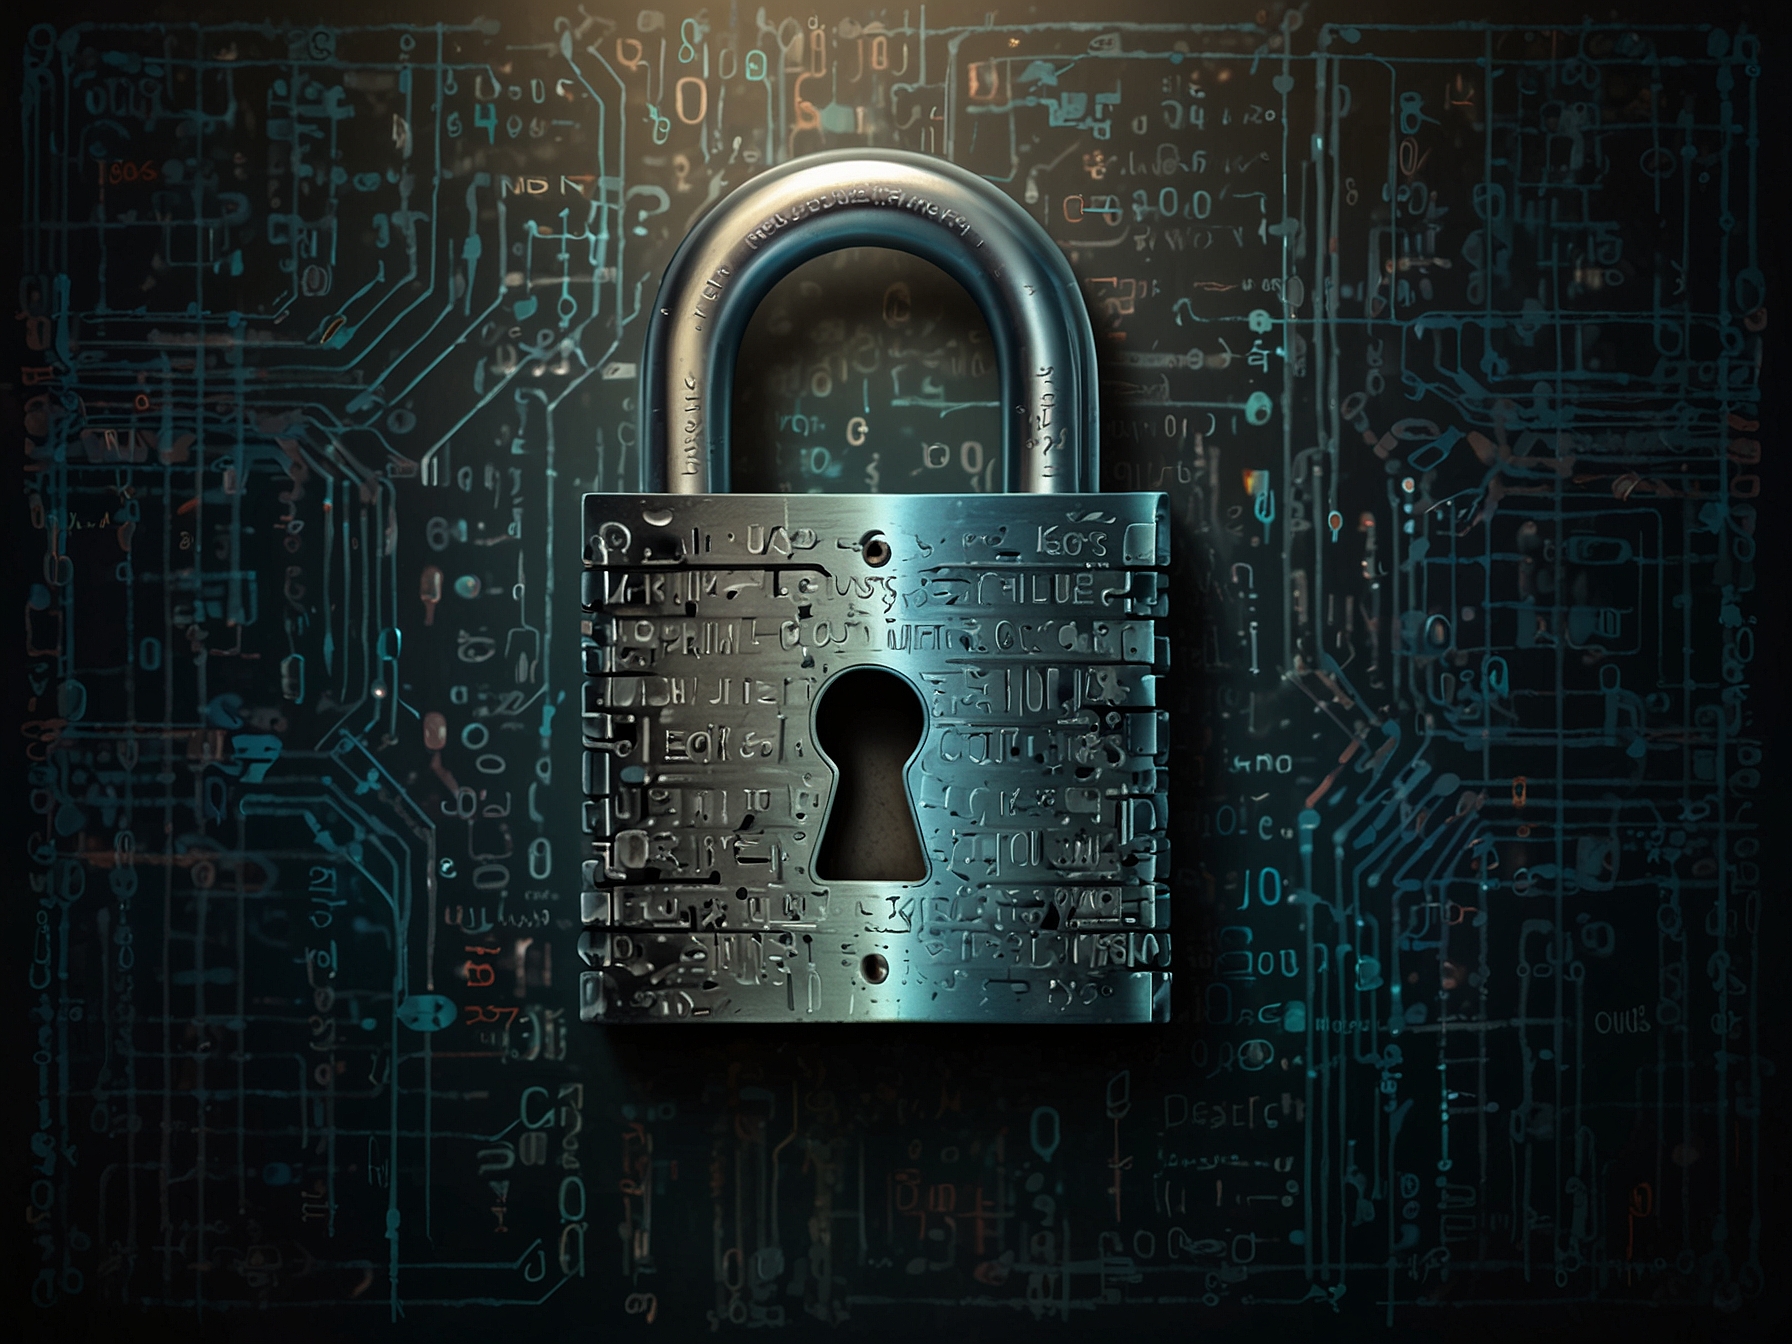 Illustration of a locked padlock over digital code, representing the U.S.'s protective stance against potential cybersecurity threats linked to Kaspersky's Russian connections.